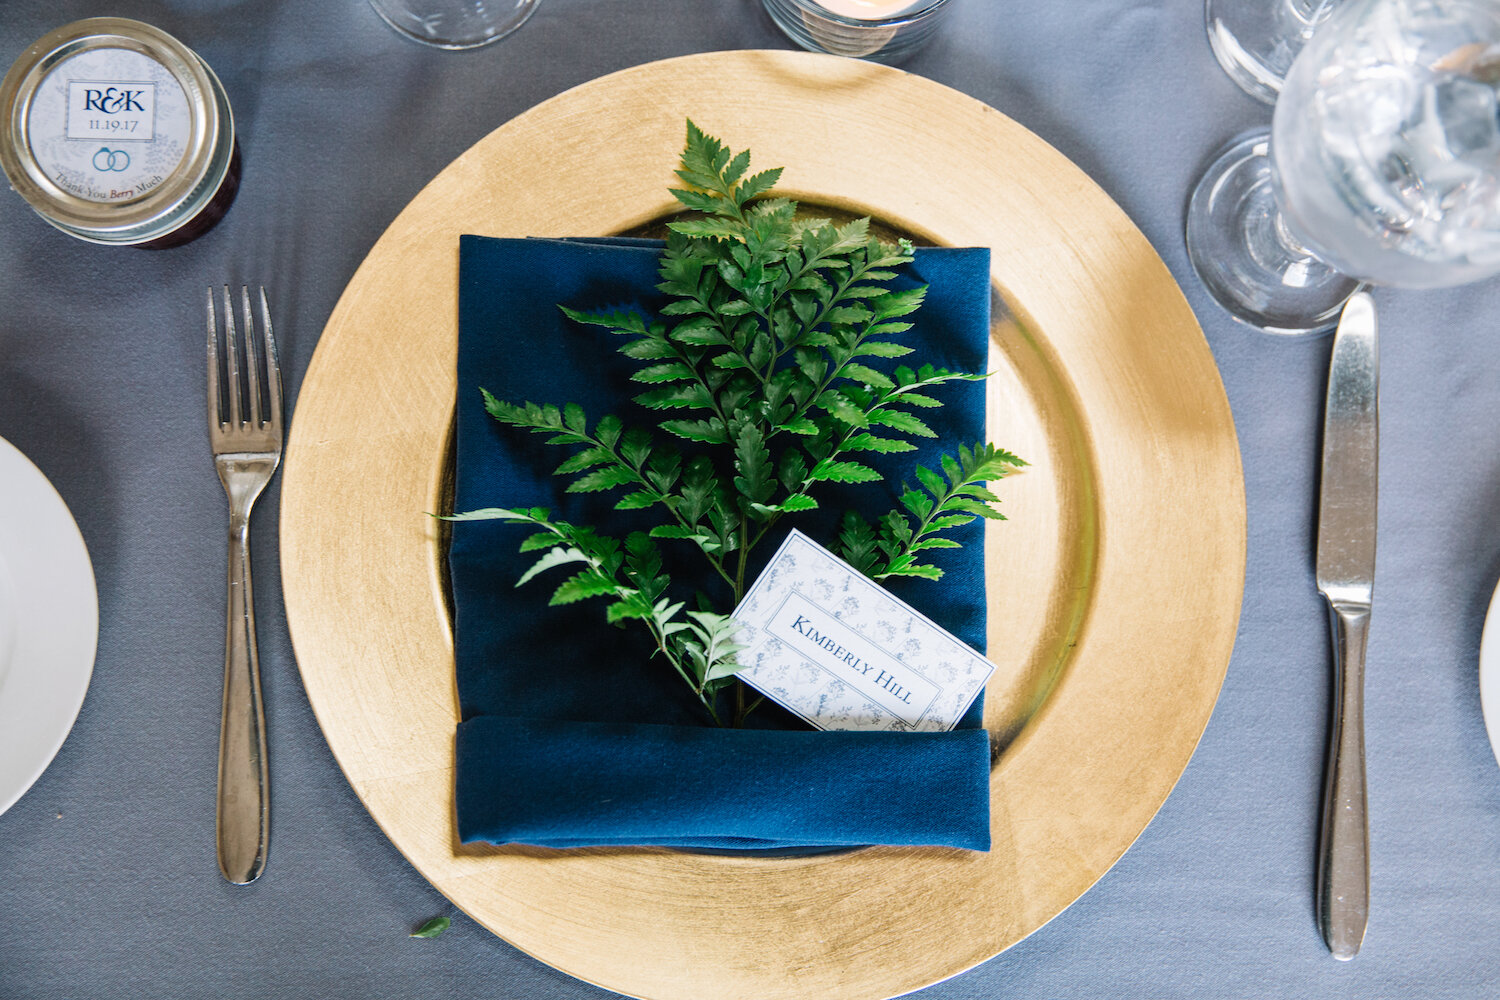 Simple fern accent on a gold charger plate.